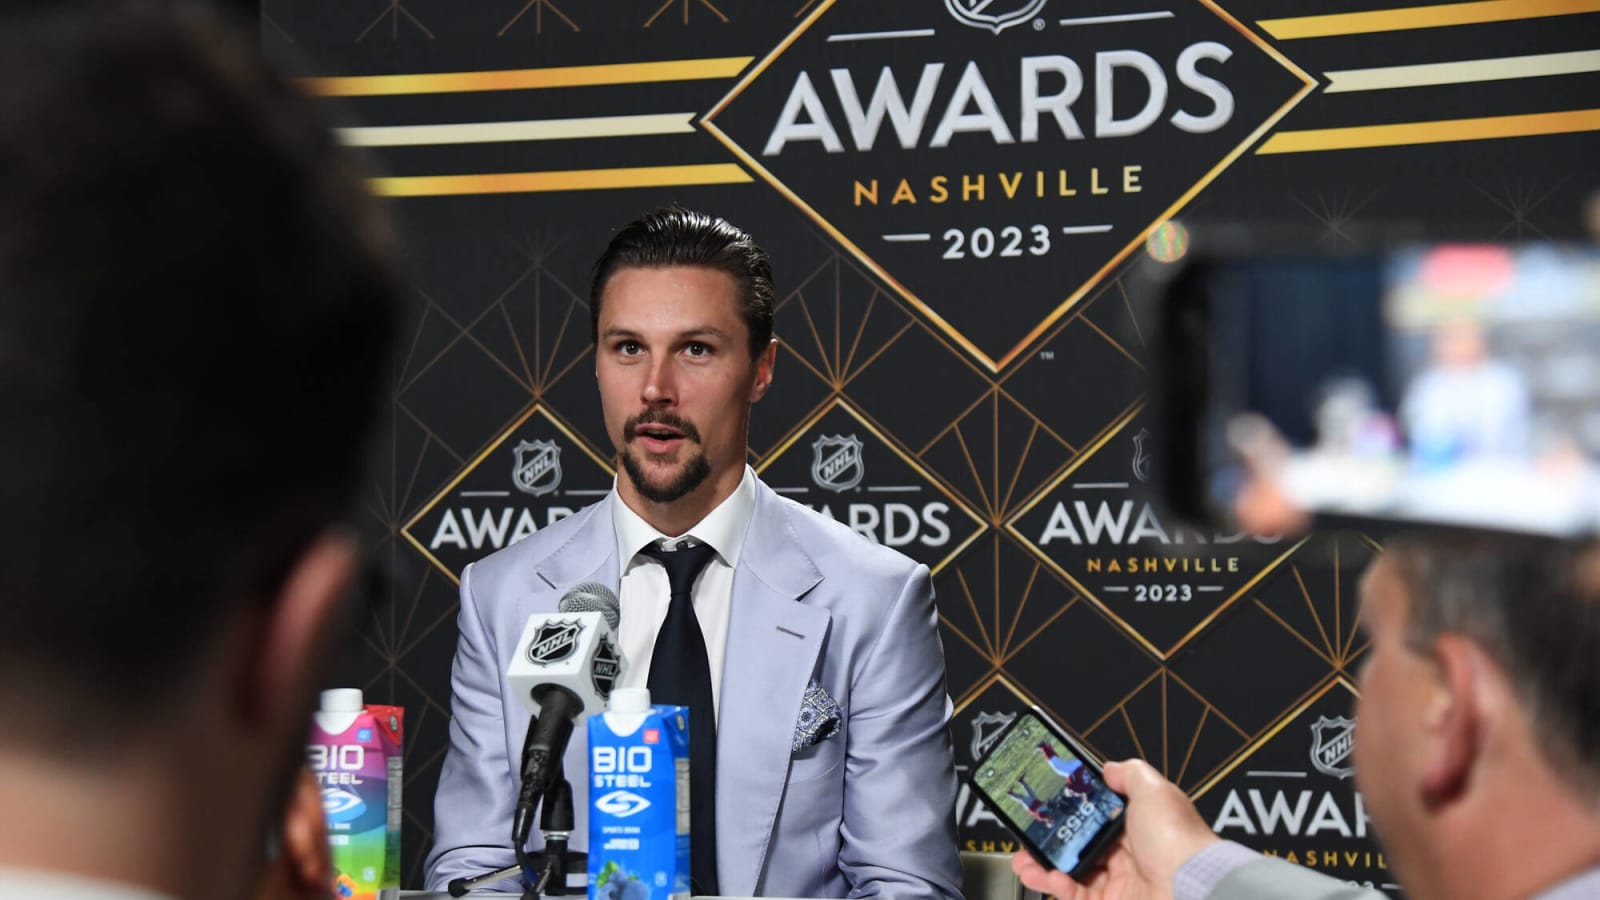 Top Stories of 2023 – No. 5: Erik Karlsson would reportedly waive his no-movement clause to join the Edmonton Oilers